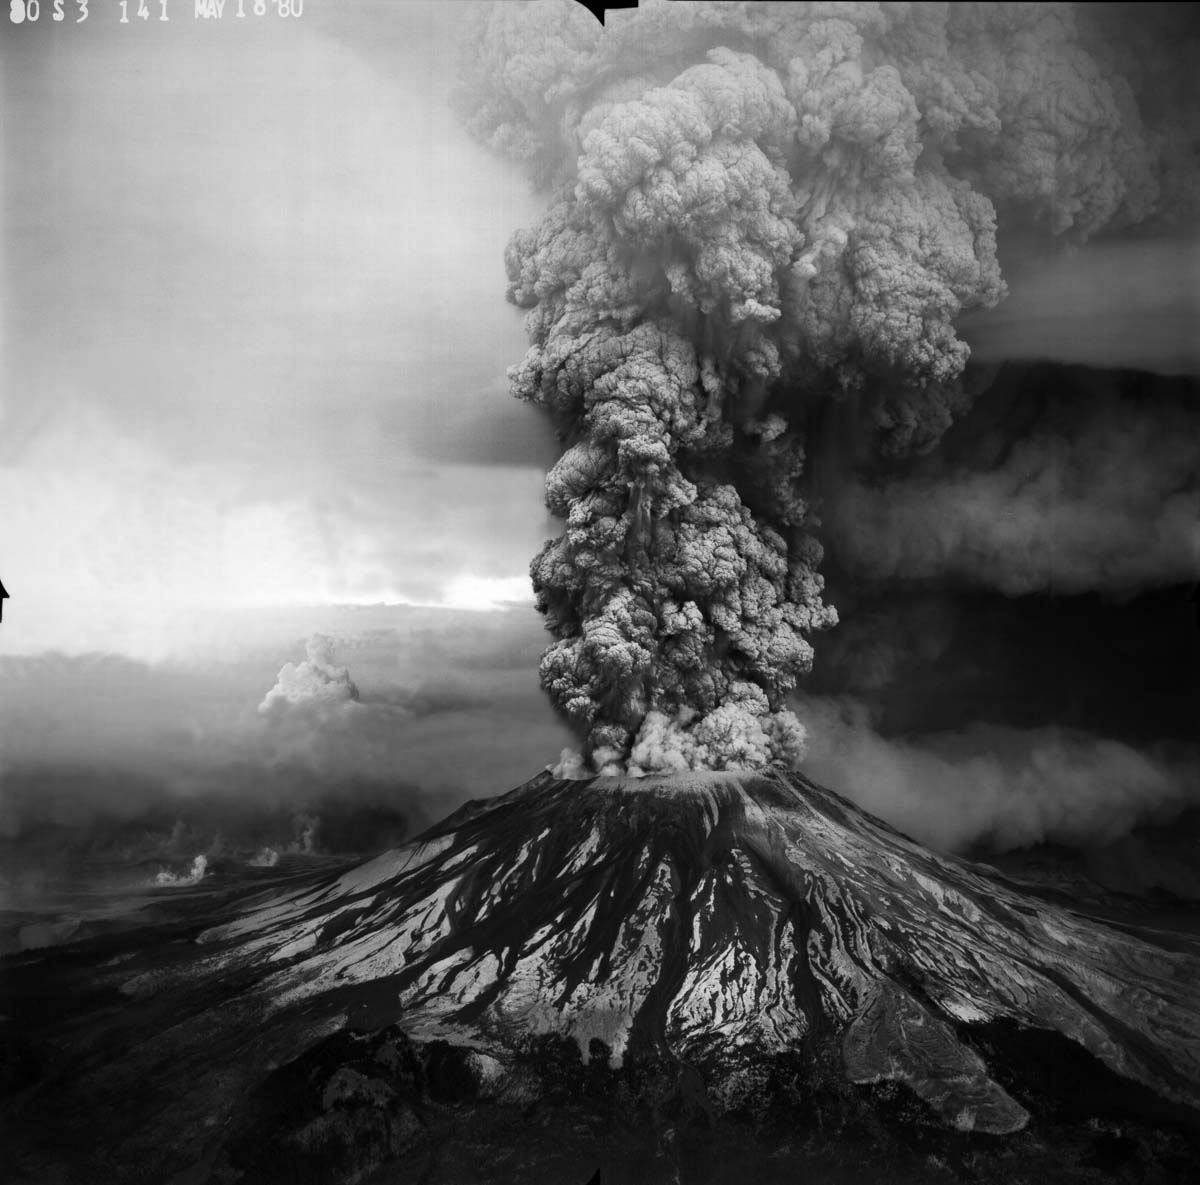 Area residents are invited to see the wonder of Mt. St. Helens on Saturday, the 39th anniversary of the 1980 eruption. loom.ly/nNEpNcQ
#MtStHelens #Eruption #Volcano #JohstonRidgeObservatory #GiffordPinchotNationalForest